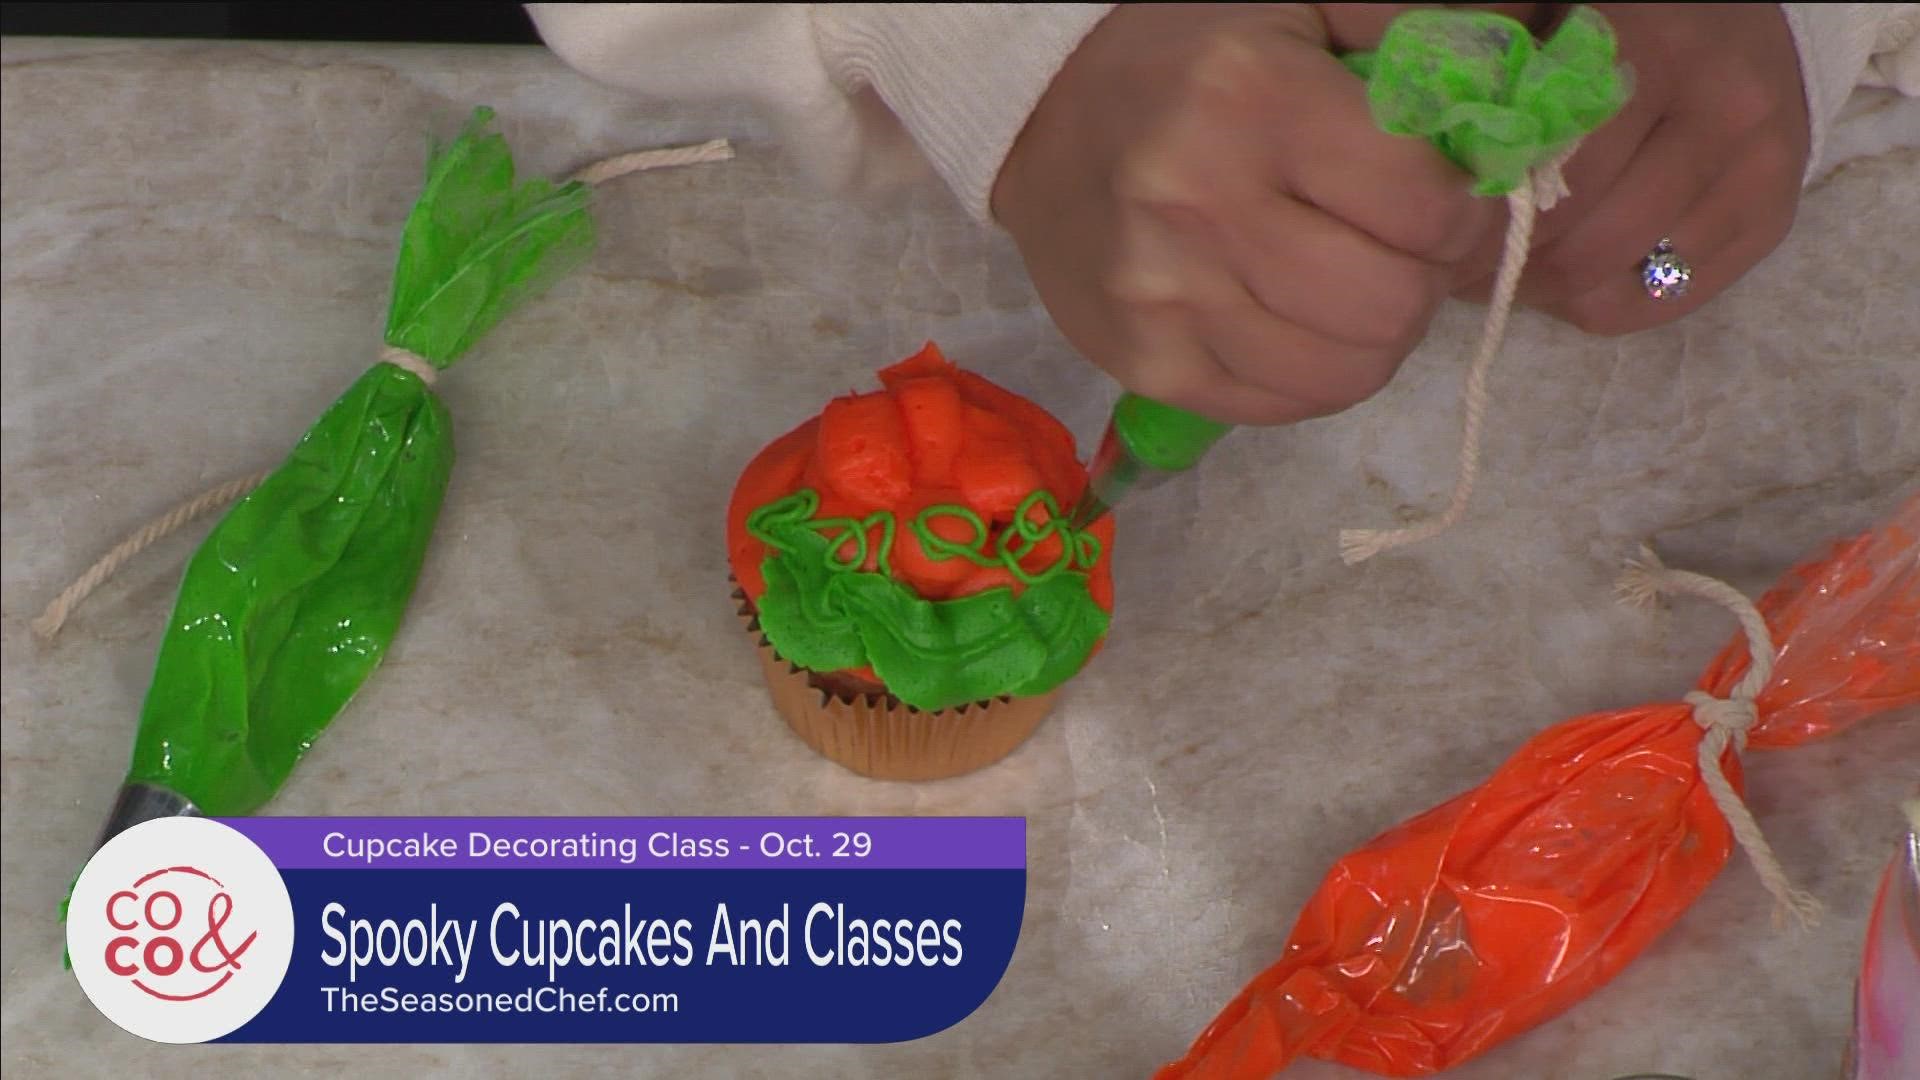 Celebrate Halloween with these spooky cupcakes! Take the class on October 29th. Visit TheSeasonedChef.com for the list of upcoming events and classes.